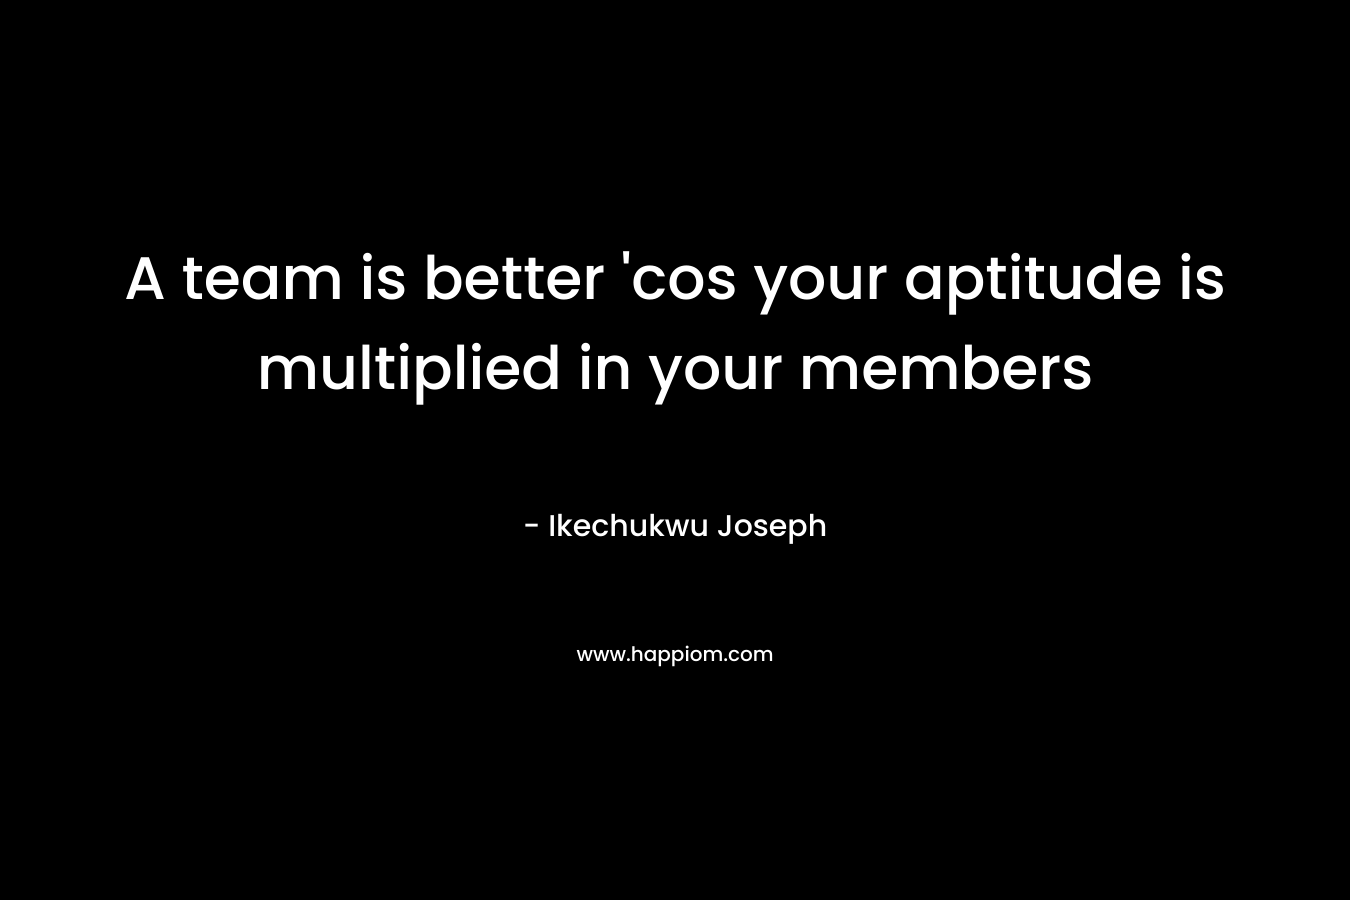 A team is better ‘cos your aptitude is multiplied in your members – Ikechukwu Joseph